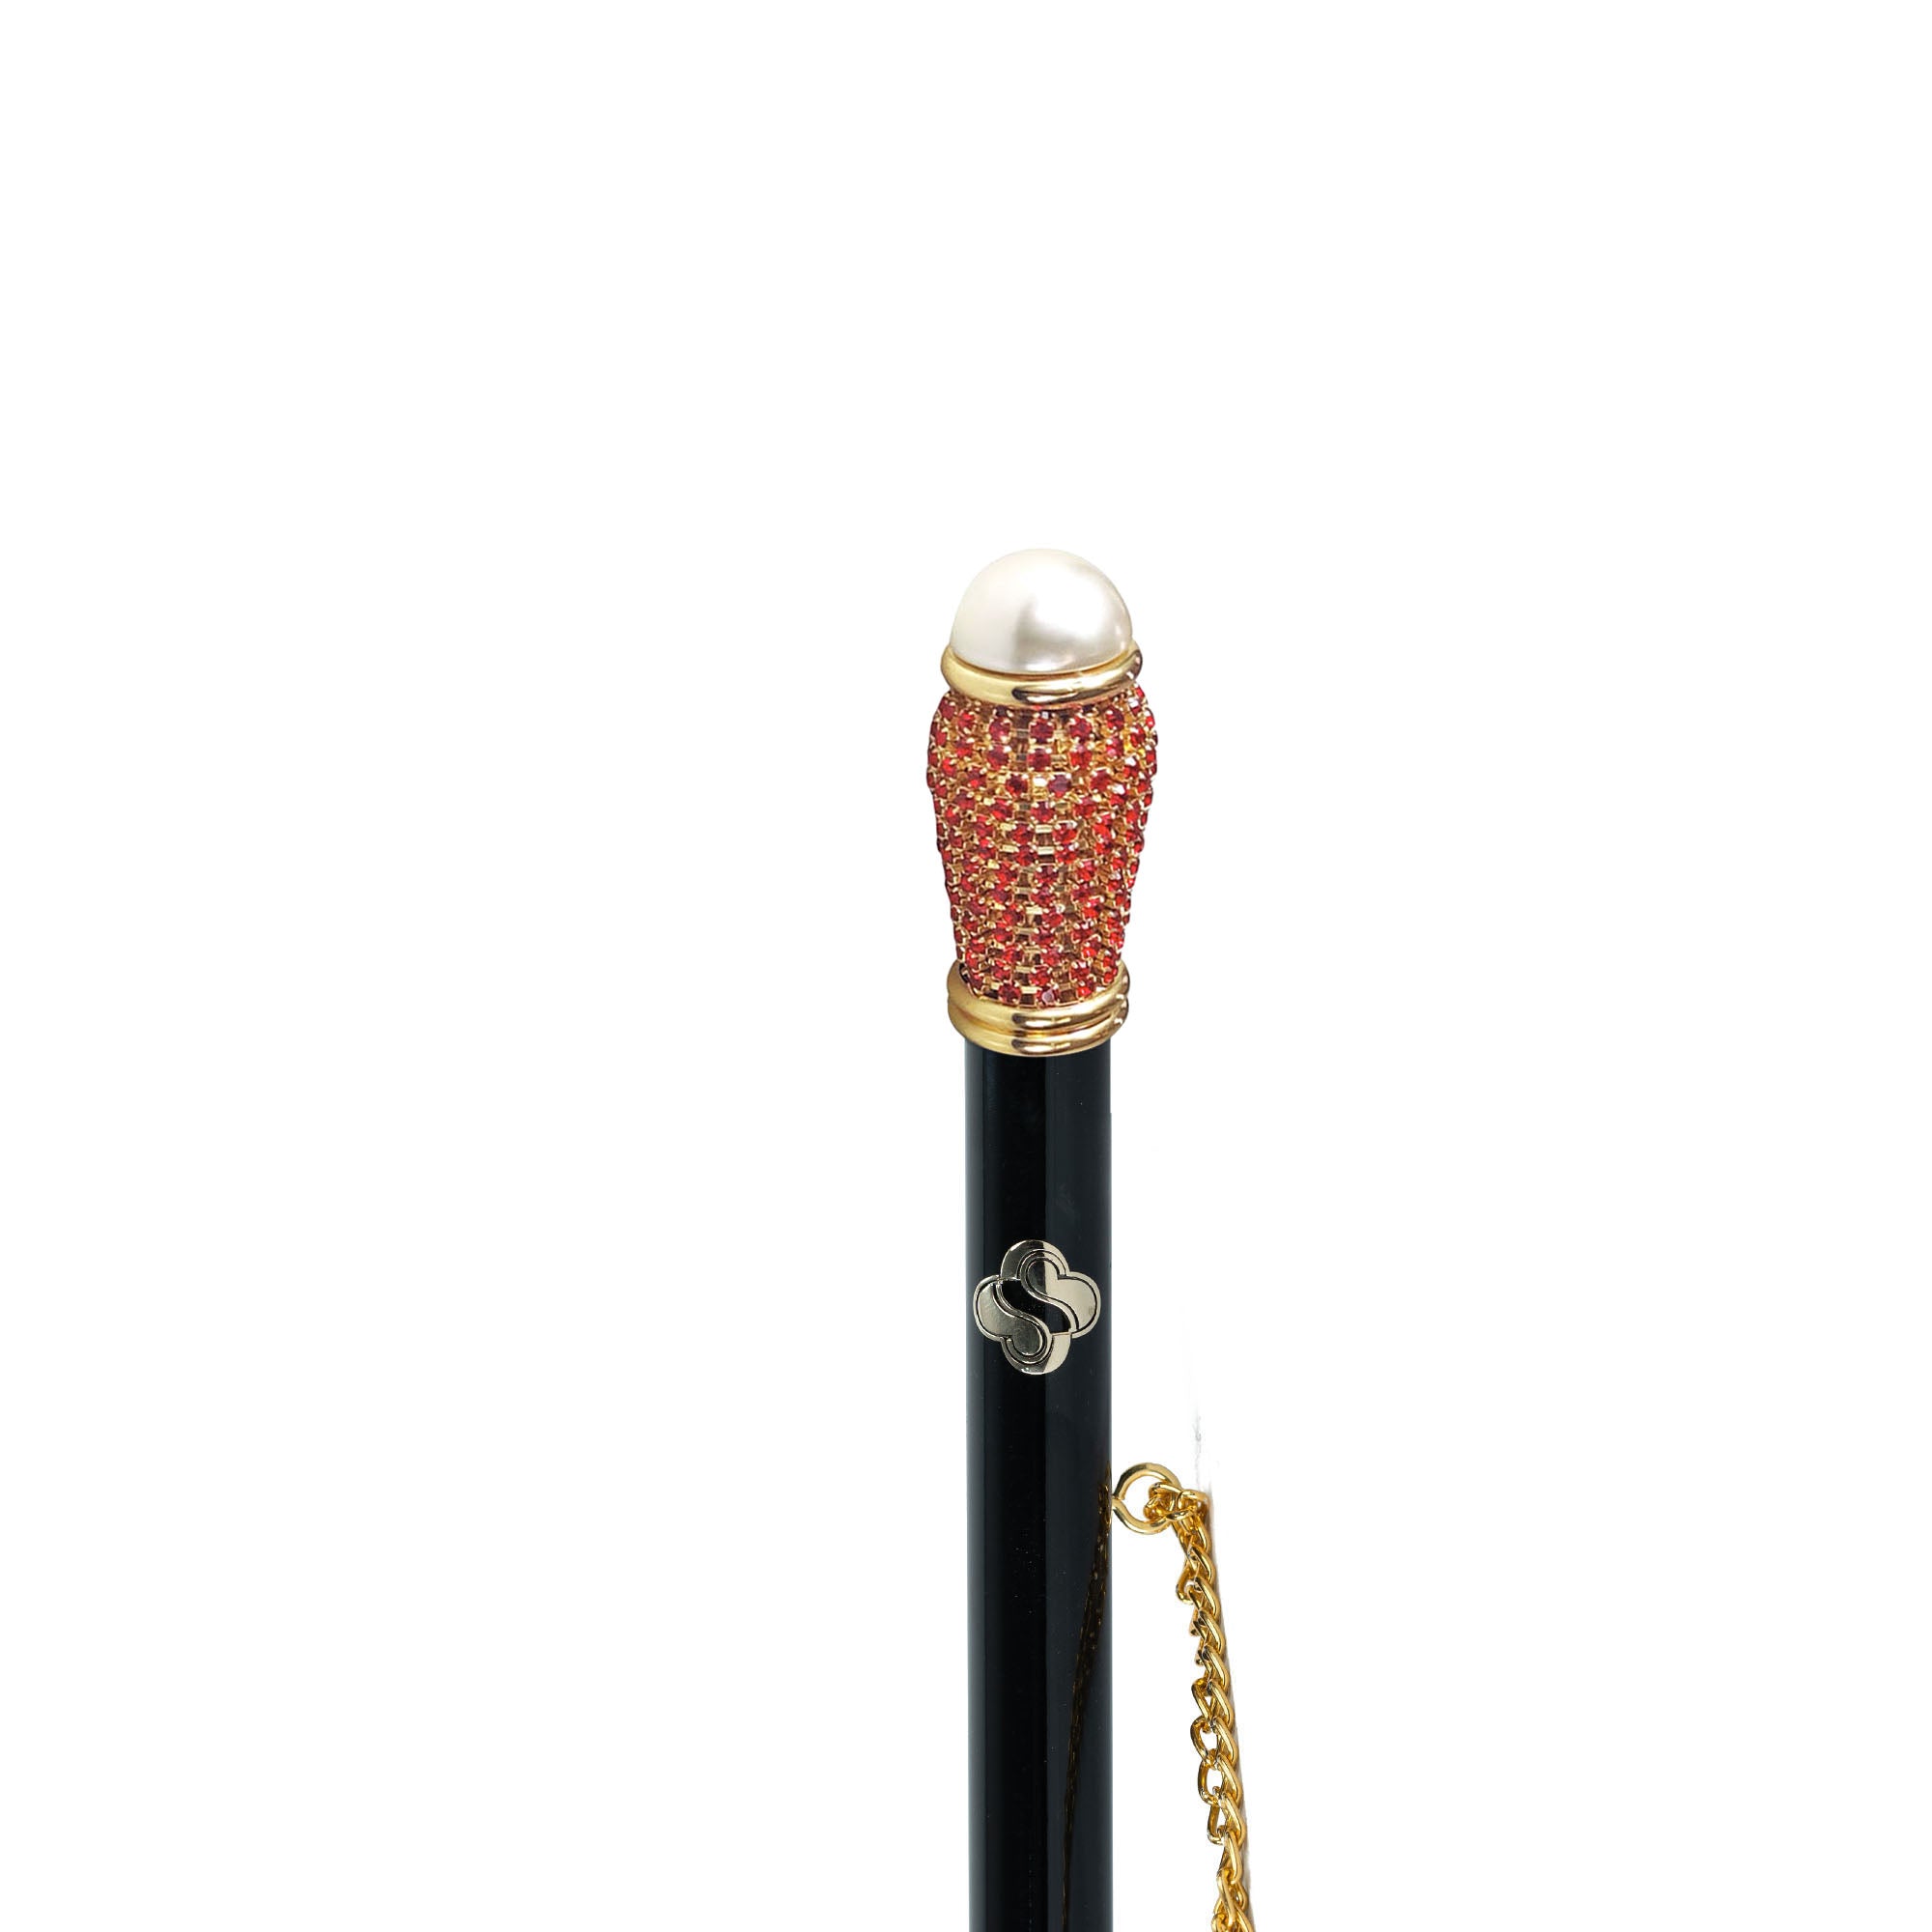 Golden Treasure: 24K Gold-Plated Shoehorn with Siam crystals